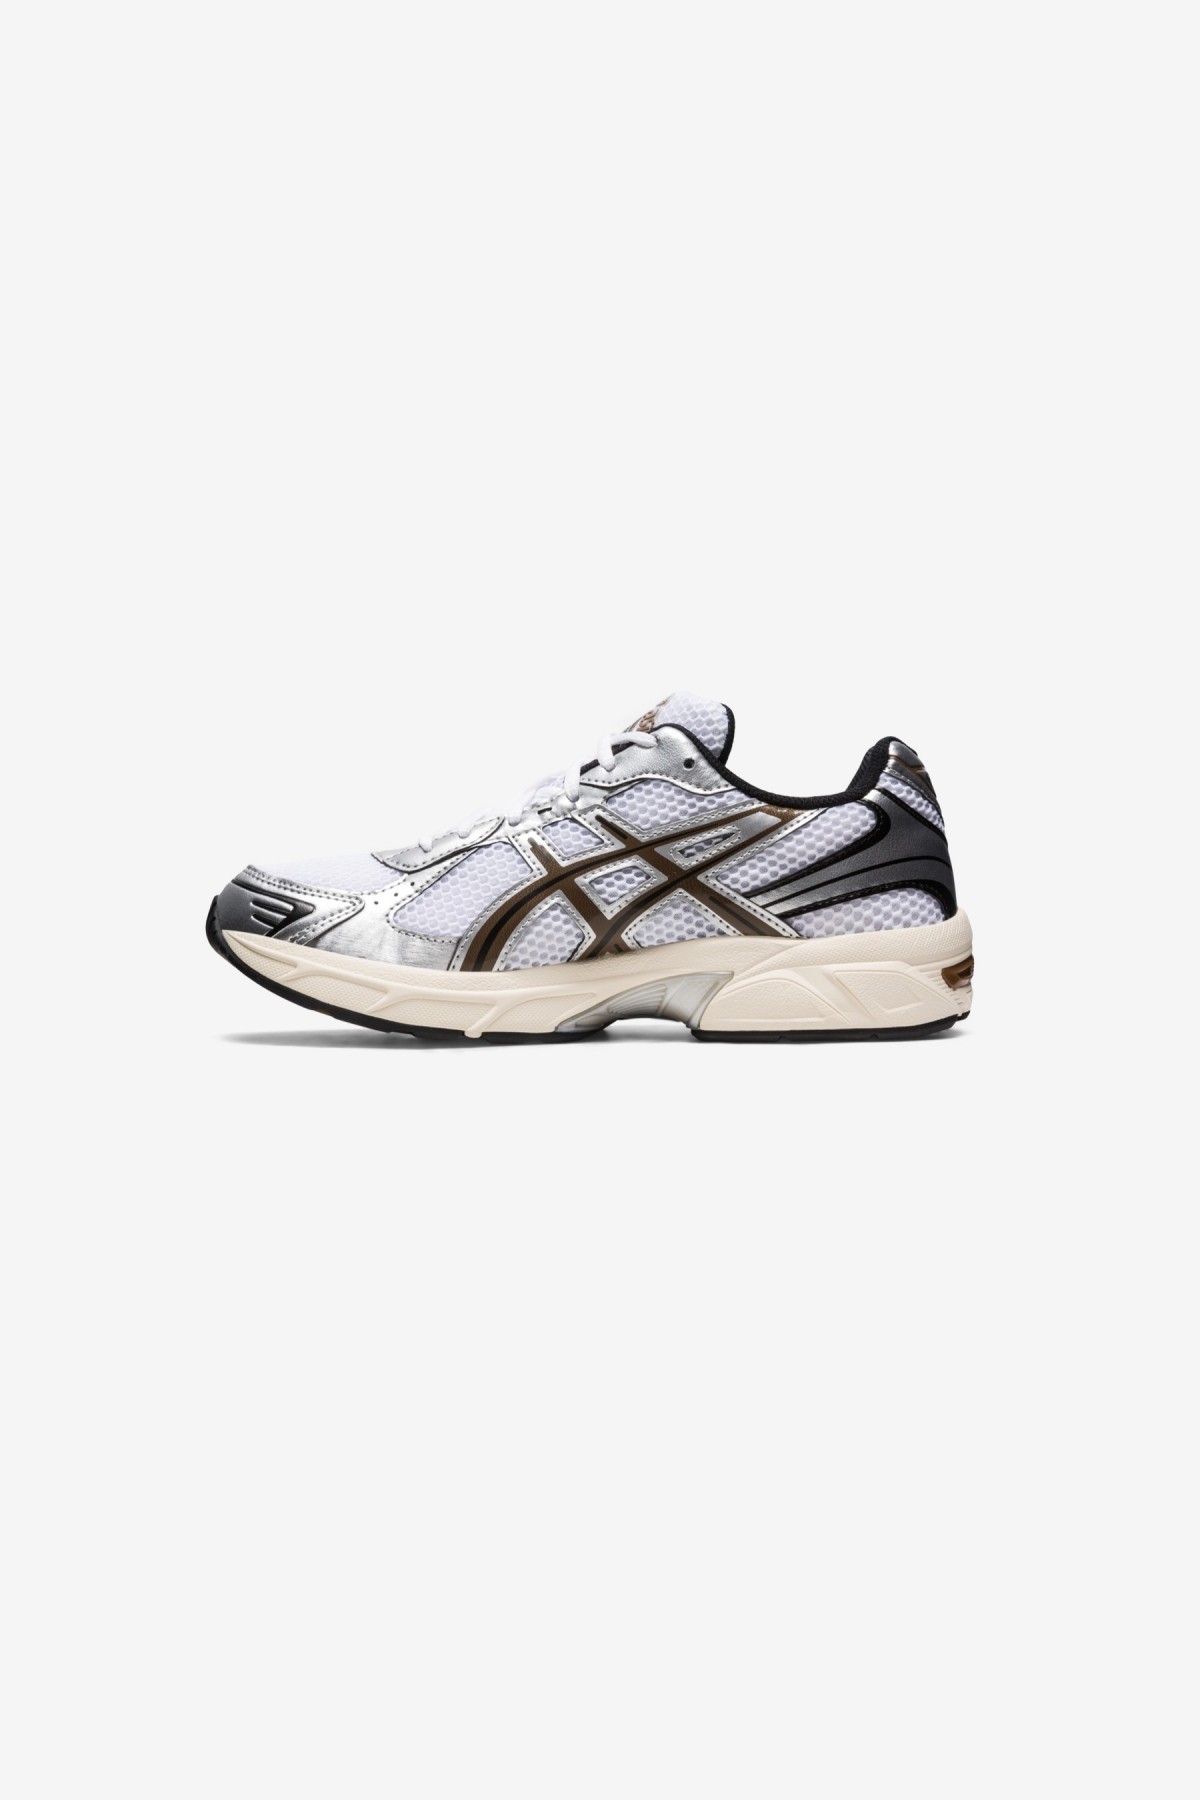 Asics Gel-1130 in White/Clay Canyon